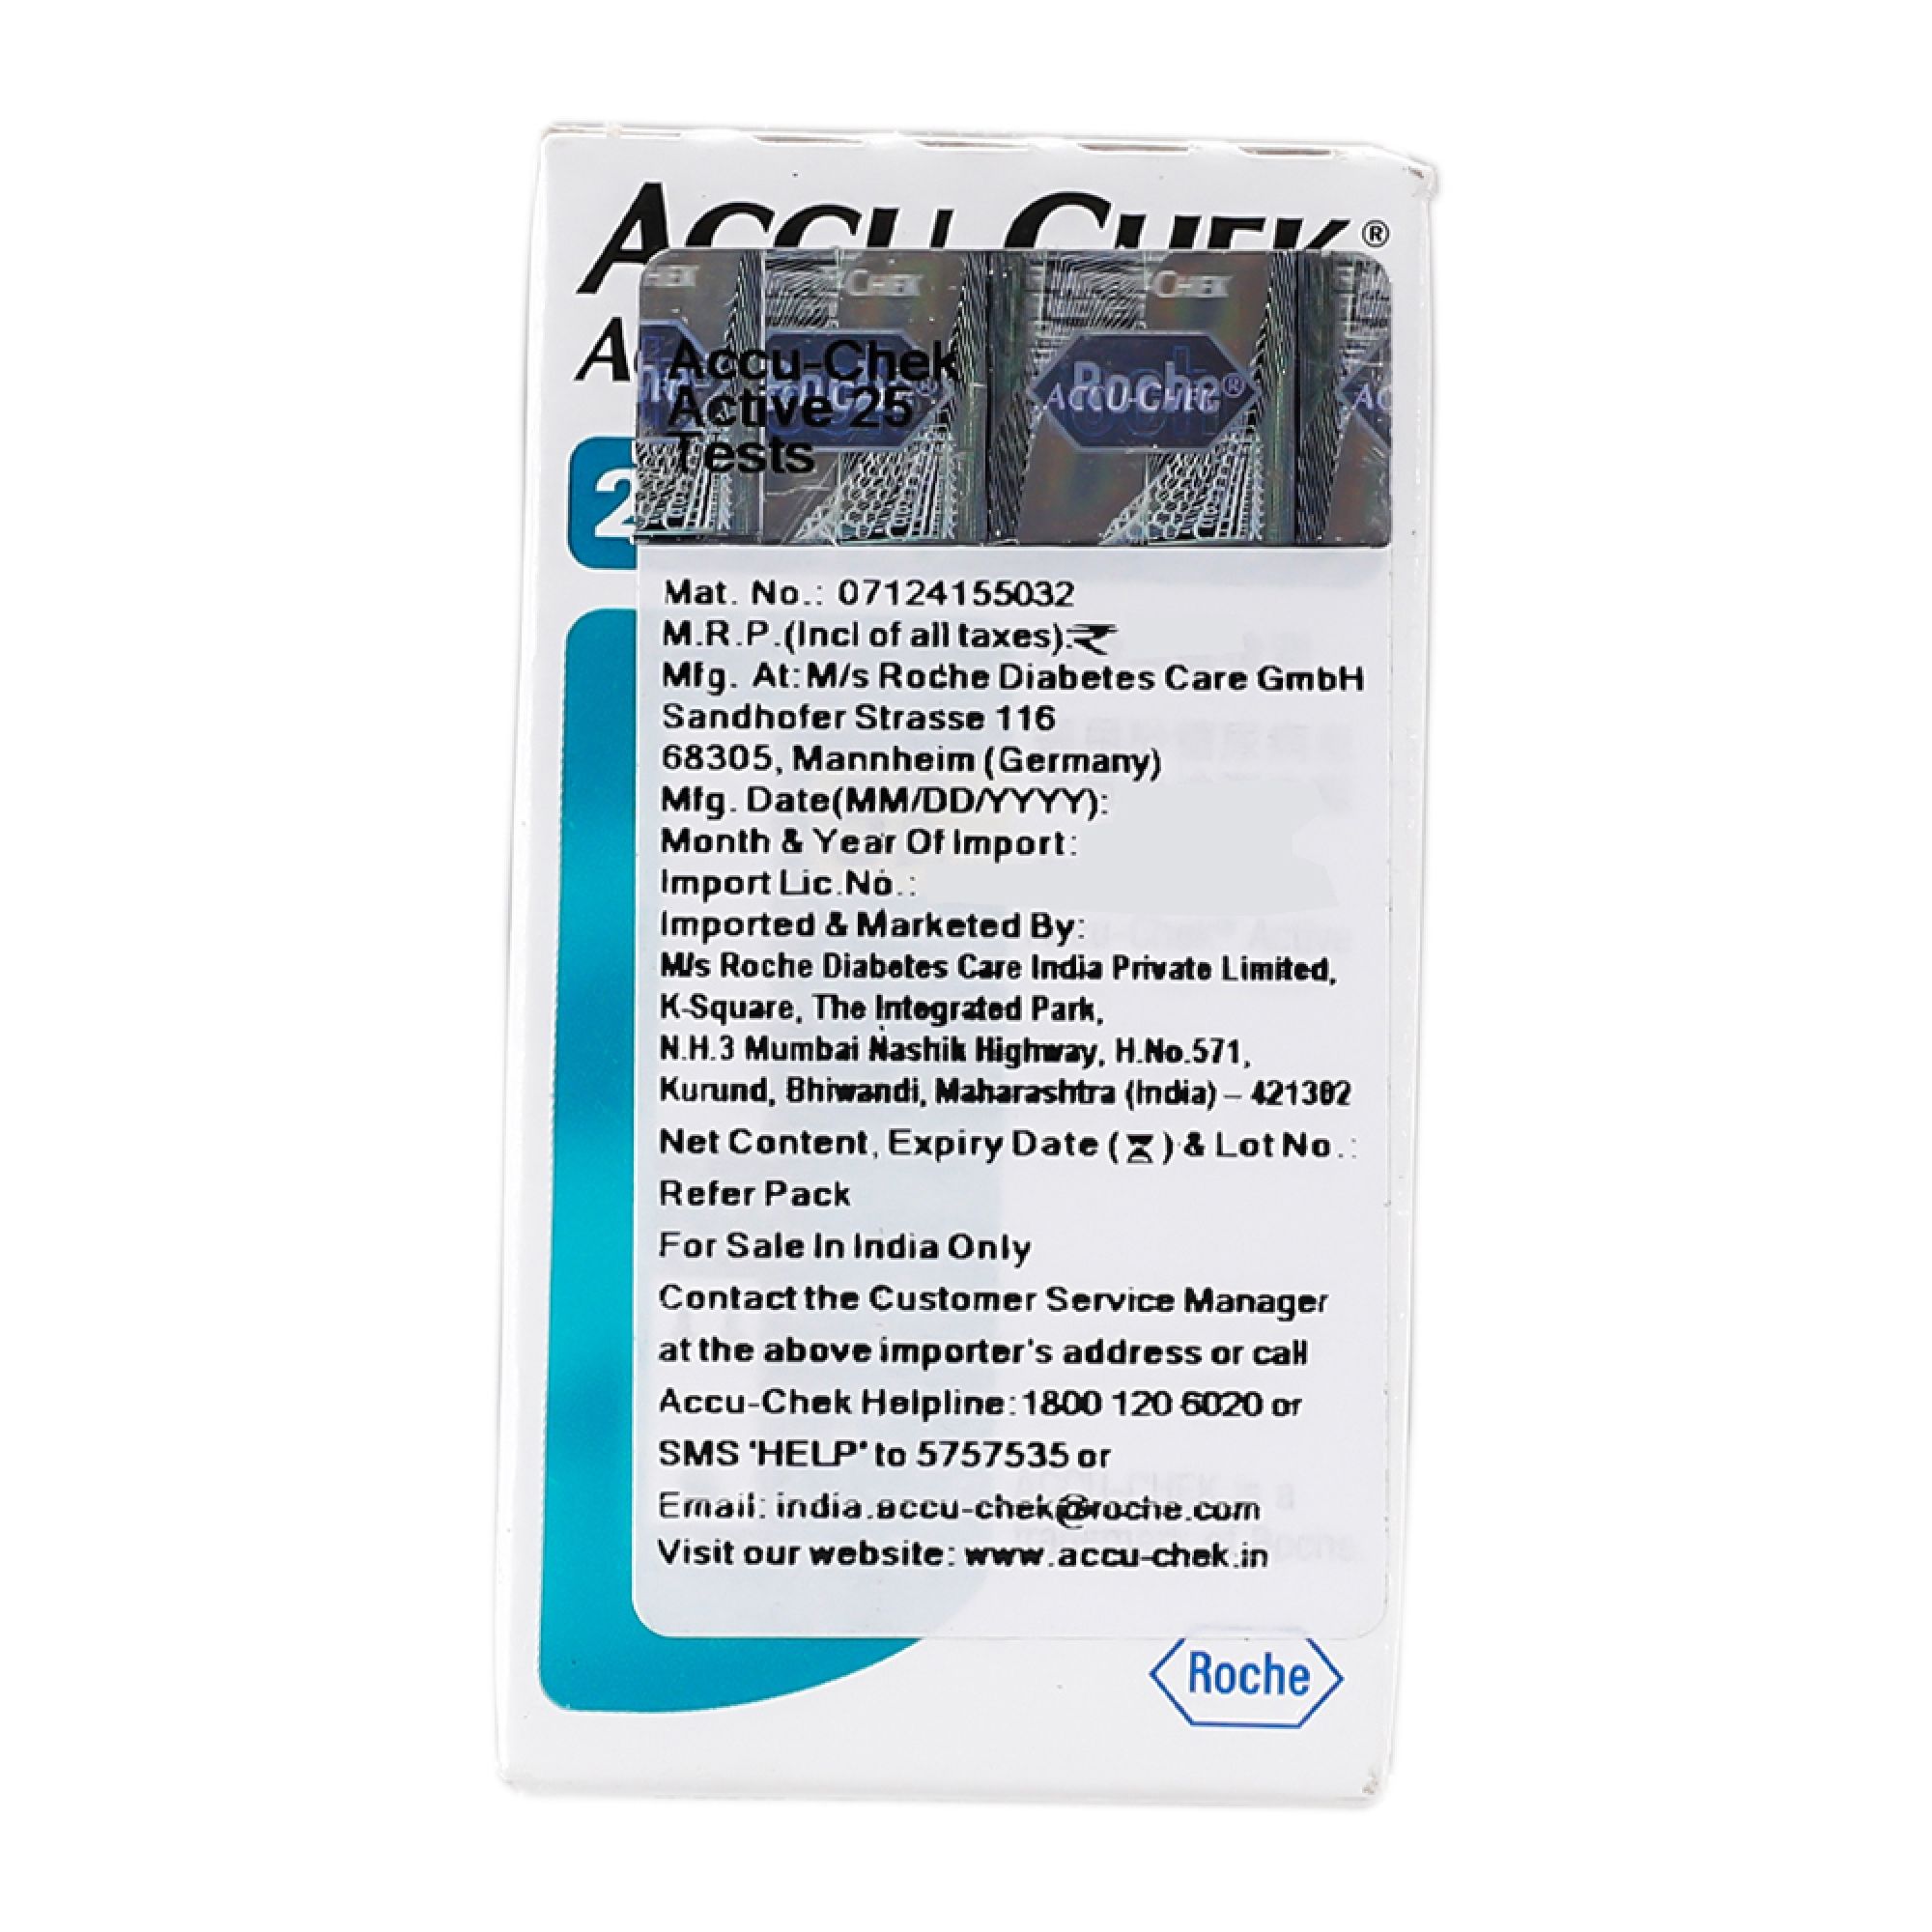 Accu-Chek Active Test Strips, 50 Count, Pack of 1 